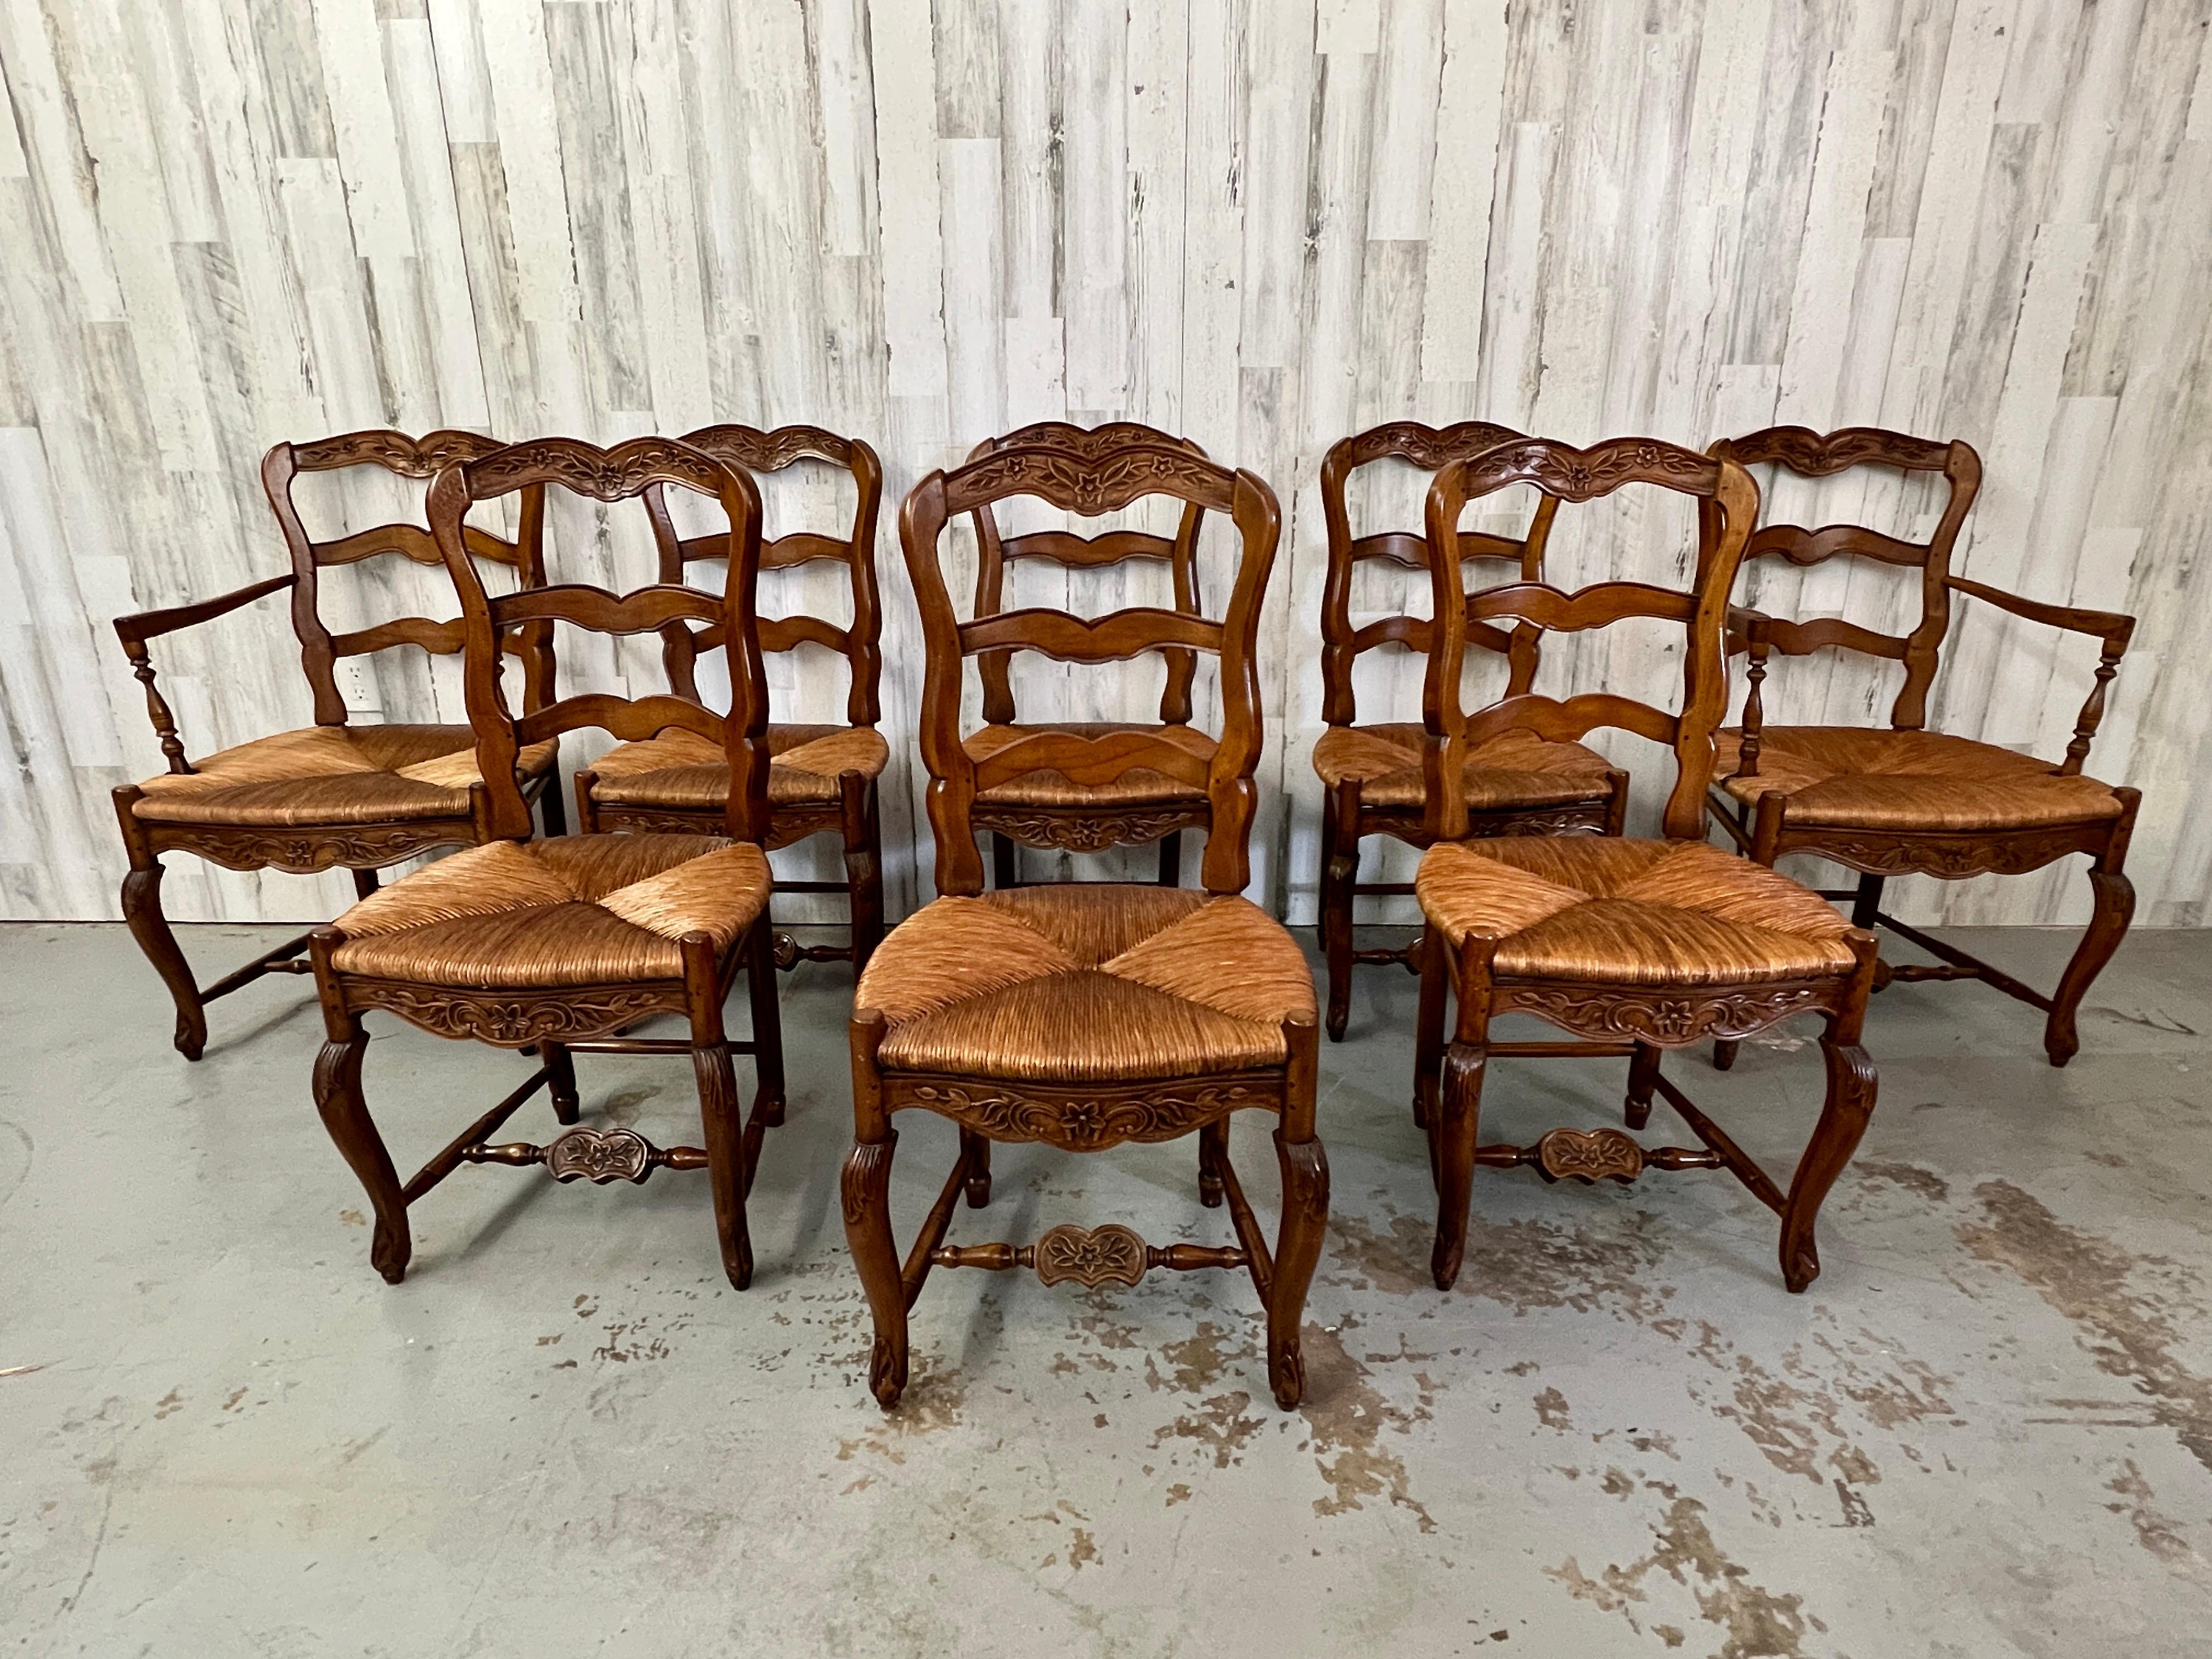 Very curvy and comfortable set of 8 country french farm chairs with real rush hand tied seats. Two arm chairs and six side chairs.
 Arm Chairs measure: 22.50 D x 23.50 W x 37.50 H x 17.50 Seat Height.
Side Chairs Measure: 19.50 D x 19 W x 38 H x